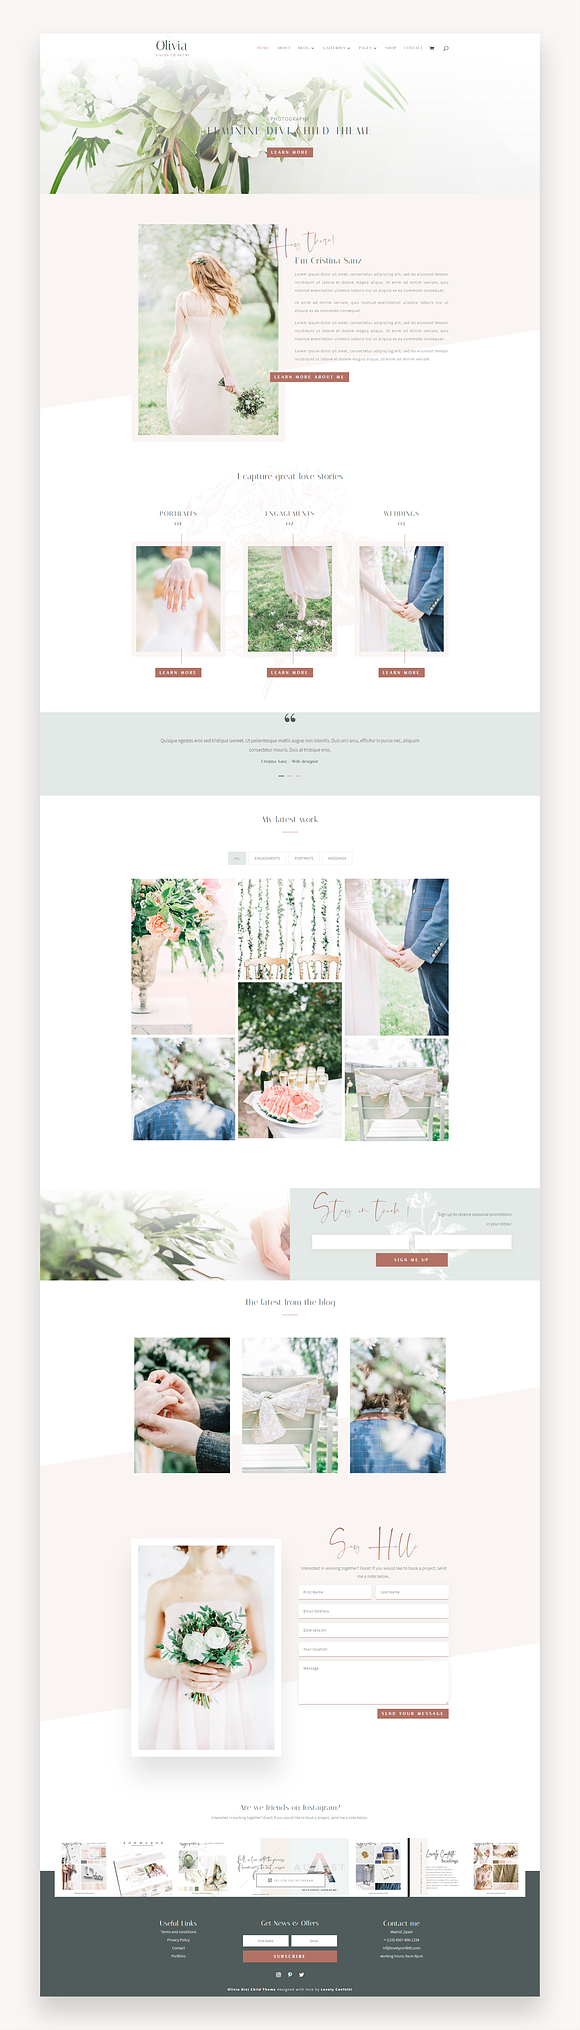 Olivia Photography Divi Child Theme in WordPress Photography Themes - product preview 4